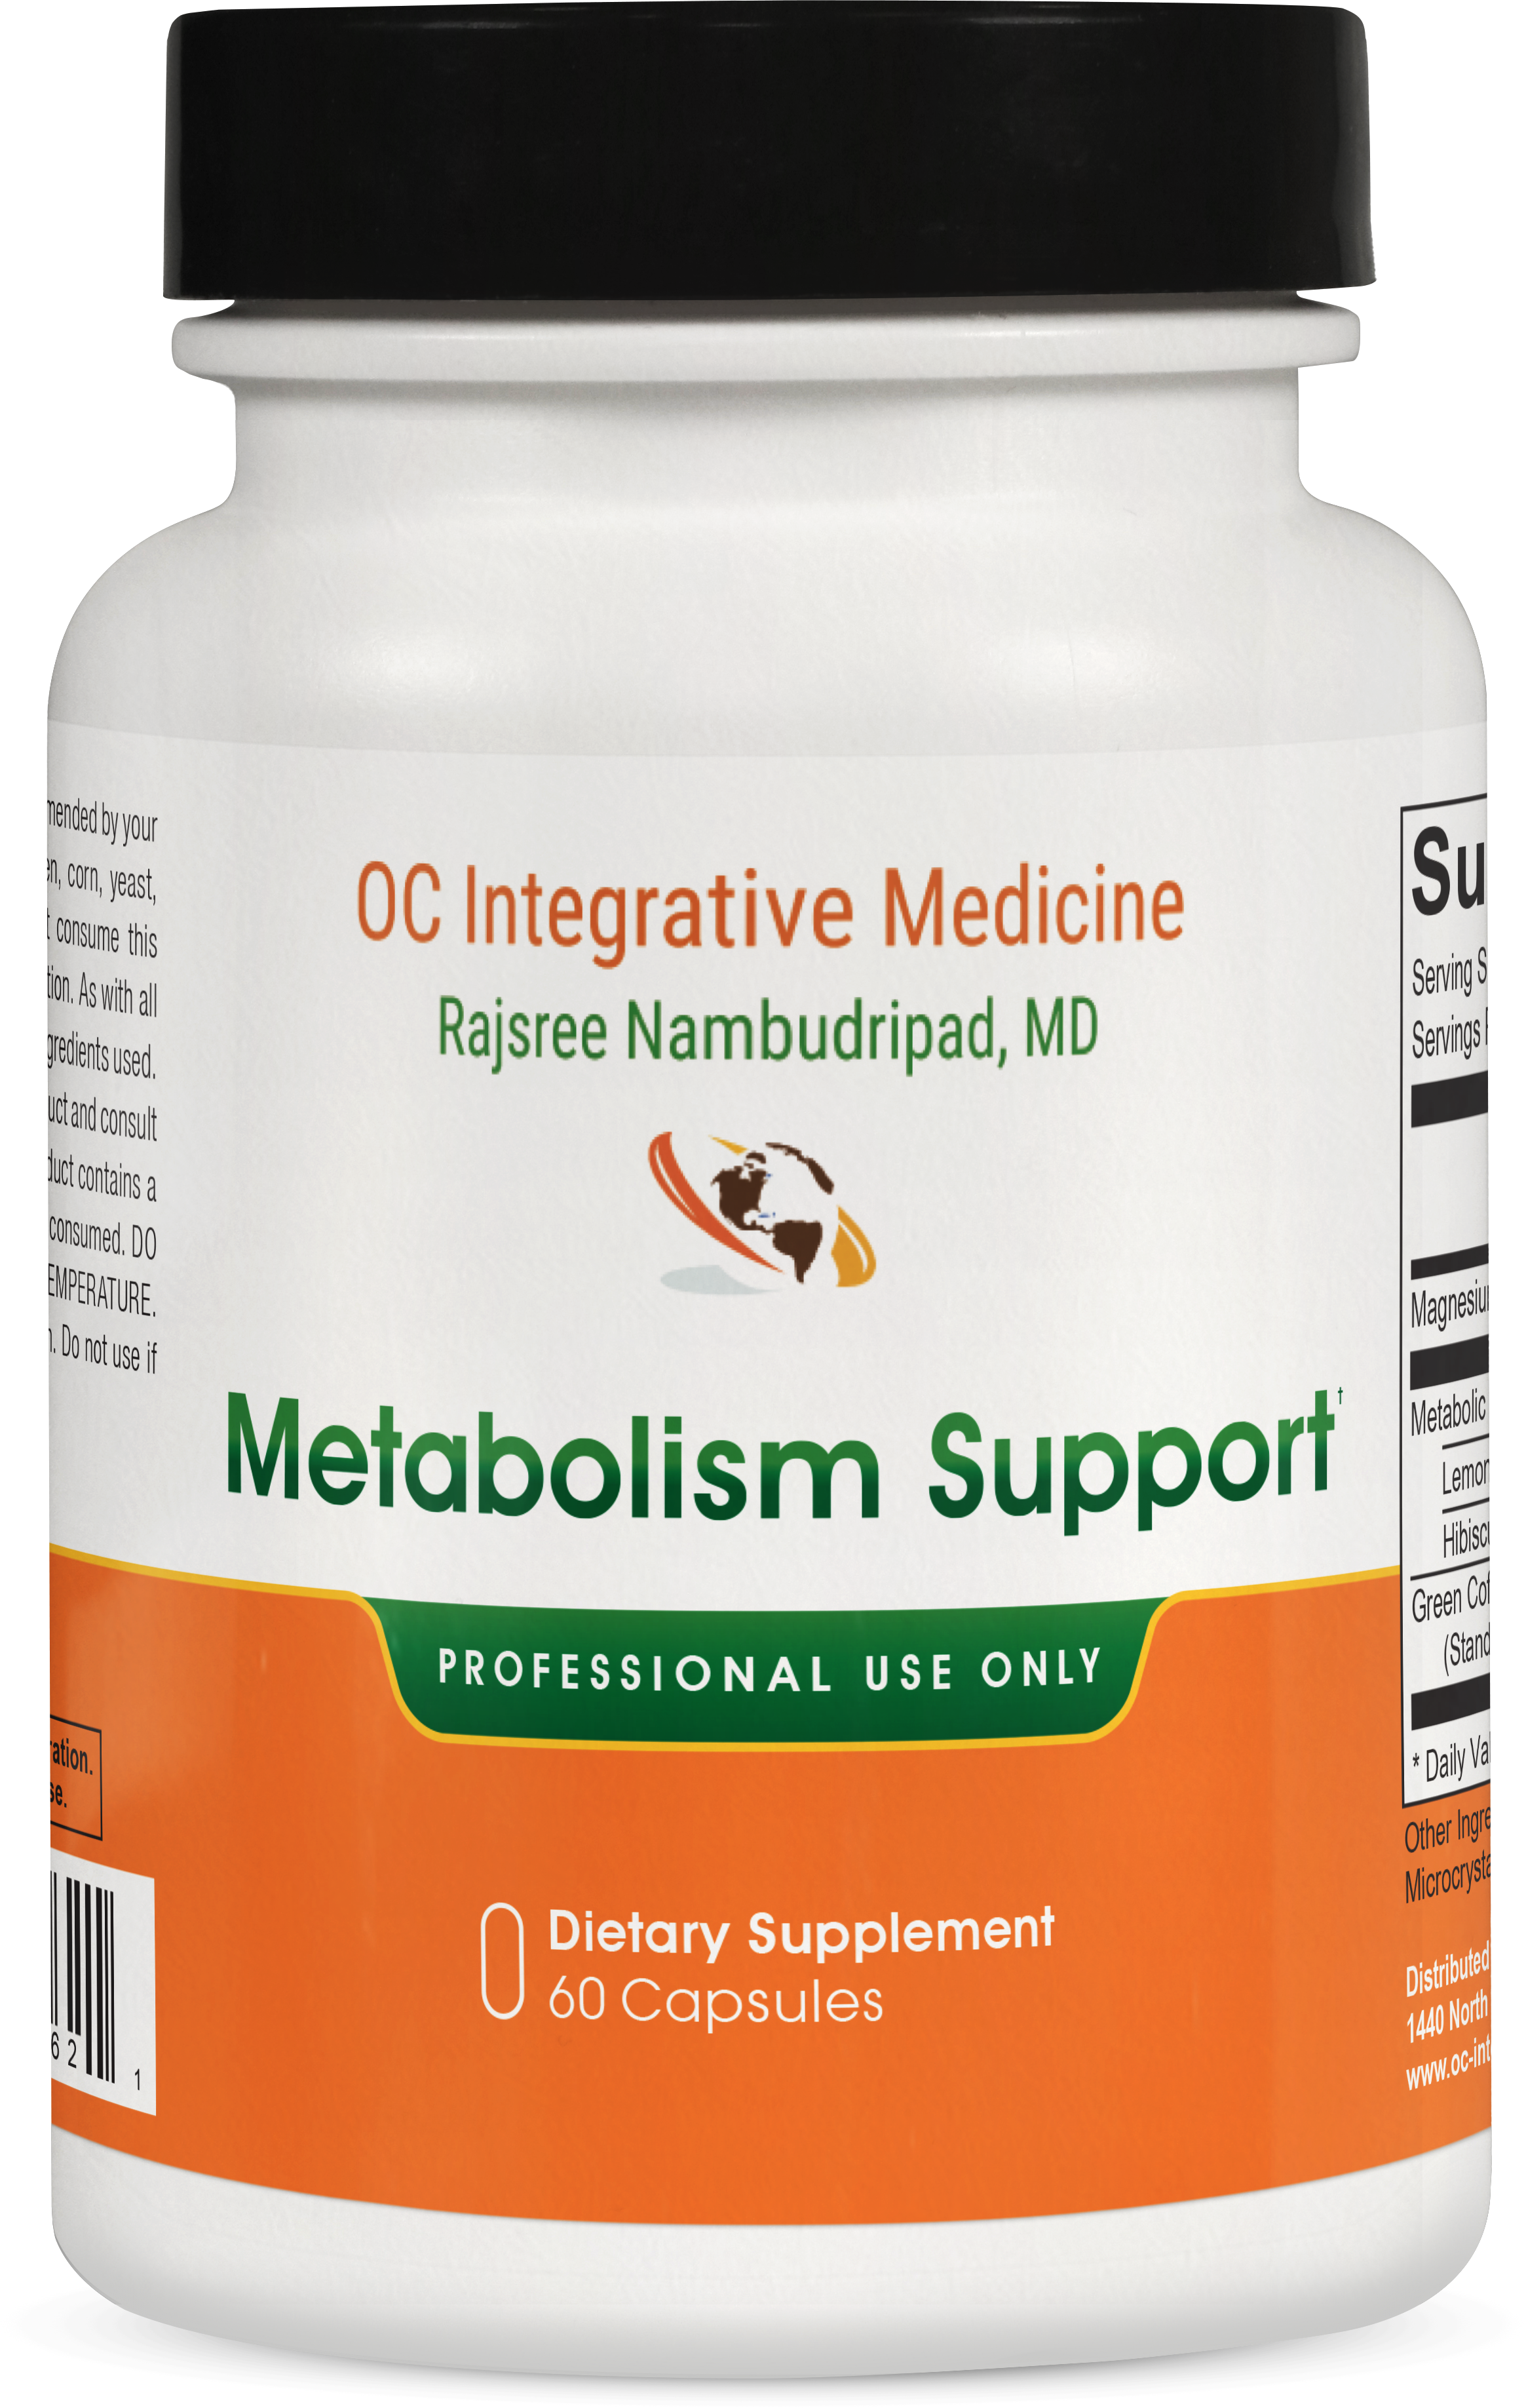 Metabolic Support